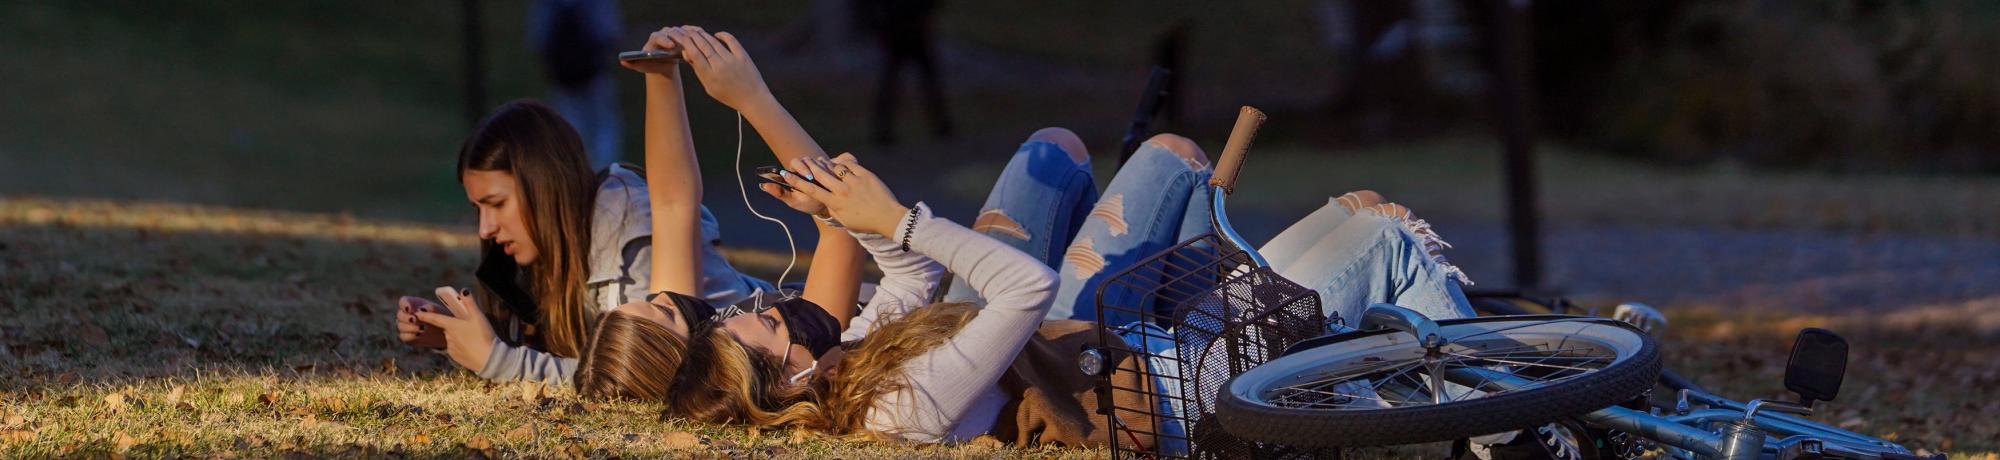 A group of students wearing face masks and lying on grass watch videos on their smartphones near Lake Spafford in the UC Davis Arboretum.